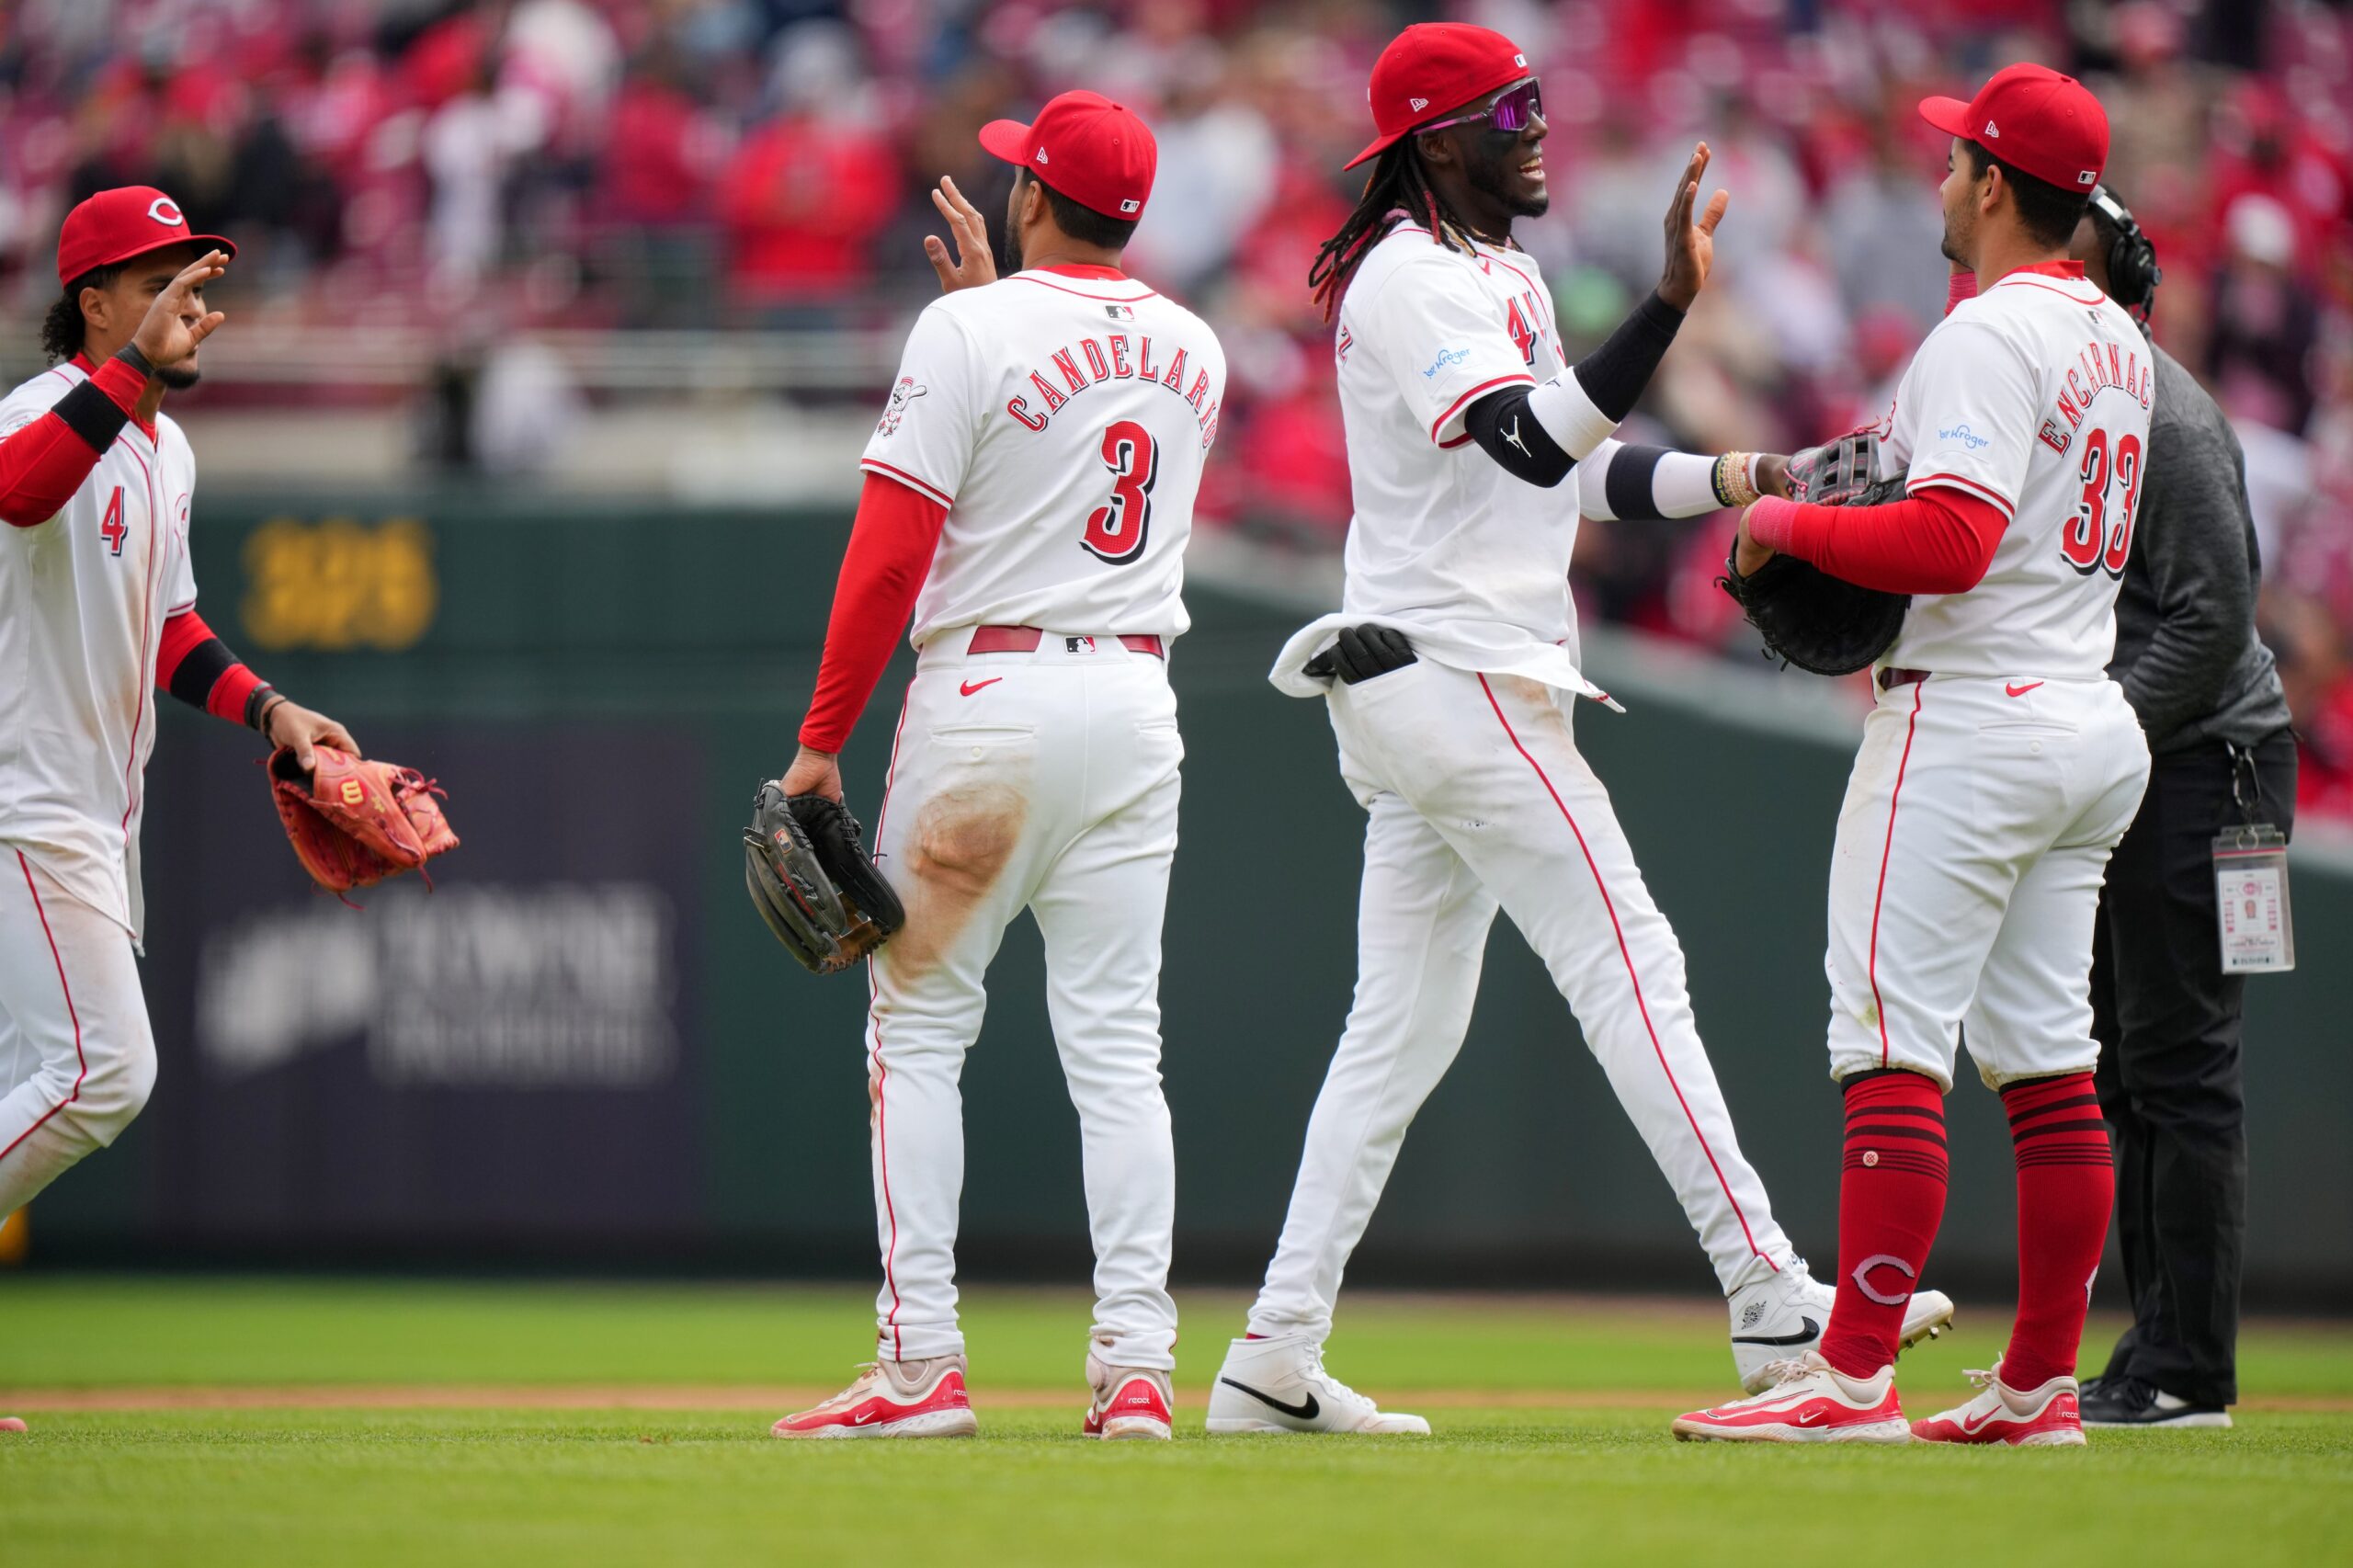 Reds Star Making His Bid For MVP With Historic Start